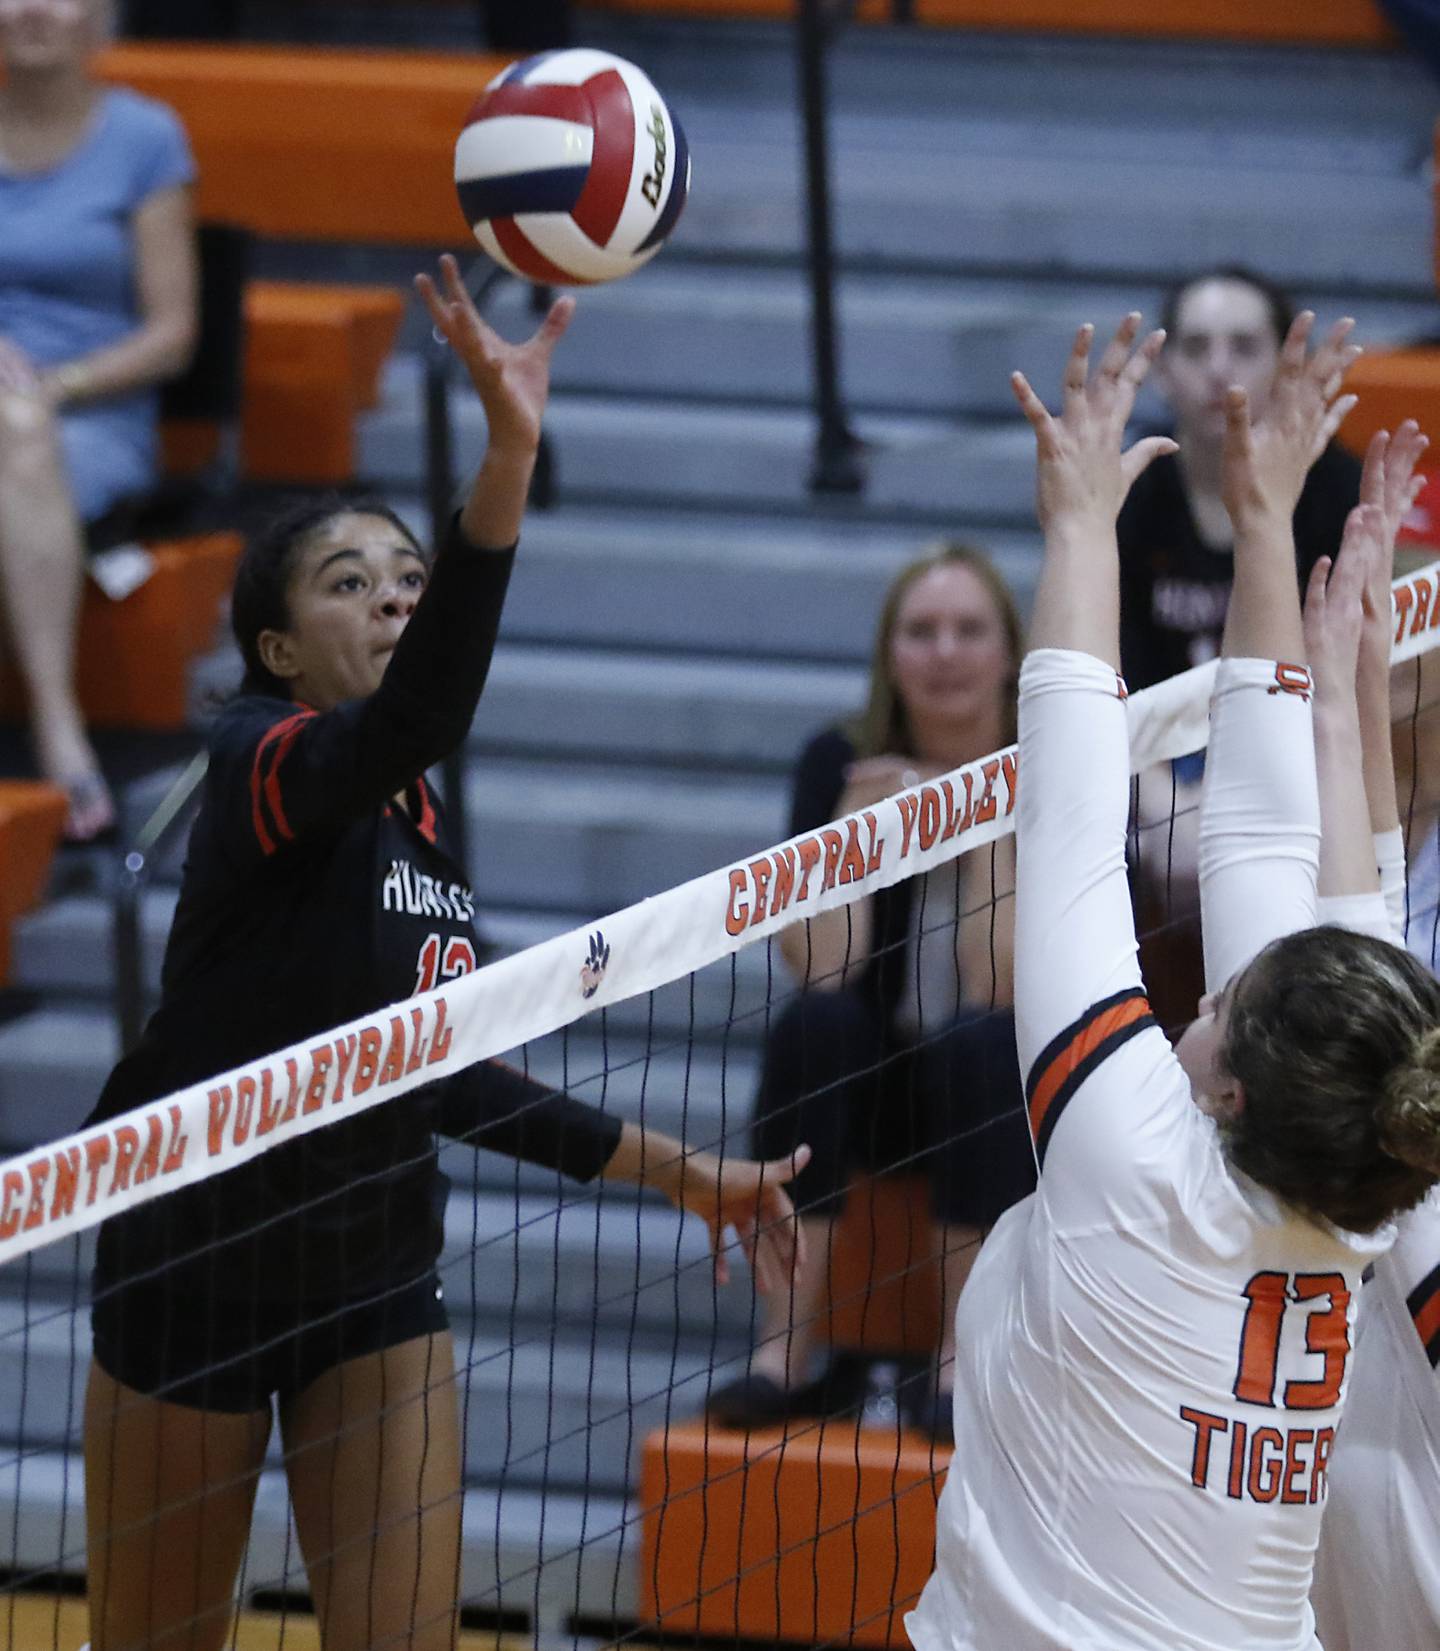 Huntley’s Morgan Jones spikes the ball as Crystal Lake Central’s Siena Smiejek tries to block the ball during a Fox Valley Conference volleyball match Tuesday, Aug. 23, 2022, between Crystal Lake Central and Huntley at Crystal Lake Central High School.